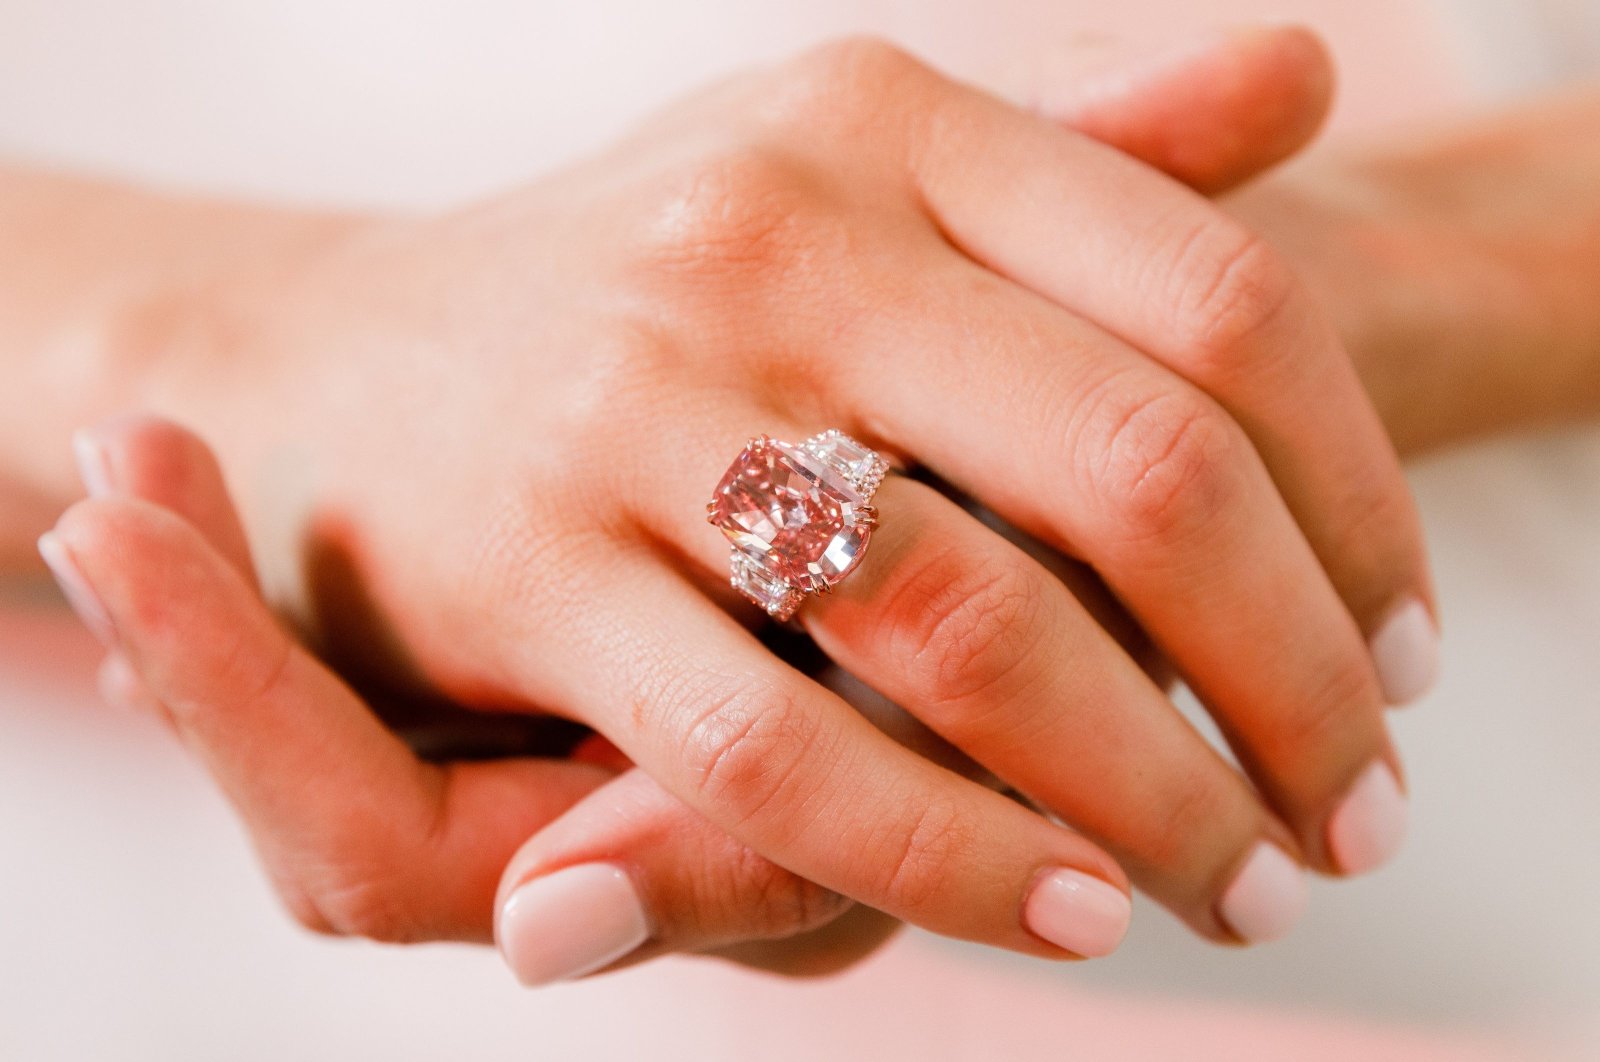 This undated image received from Sotheby&#039;s auction house on Oct. 8, 2022, shows the Williamson Pink Star diamond, which was sold at auction in Hong Kong for nearly $58 million on Oct. 7, setting a record for price per carat for any diamond or gemstone, according to auction house Sotheby&#039;s. (Sotheby&#039;s via AFP)